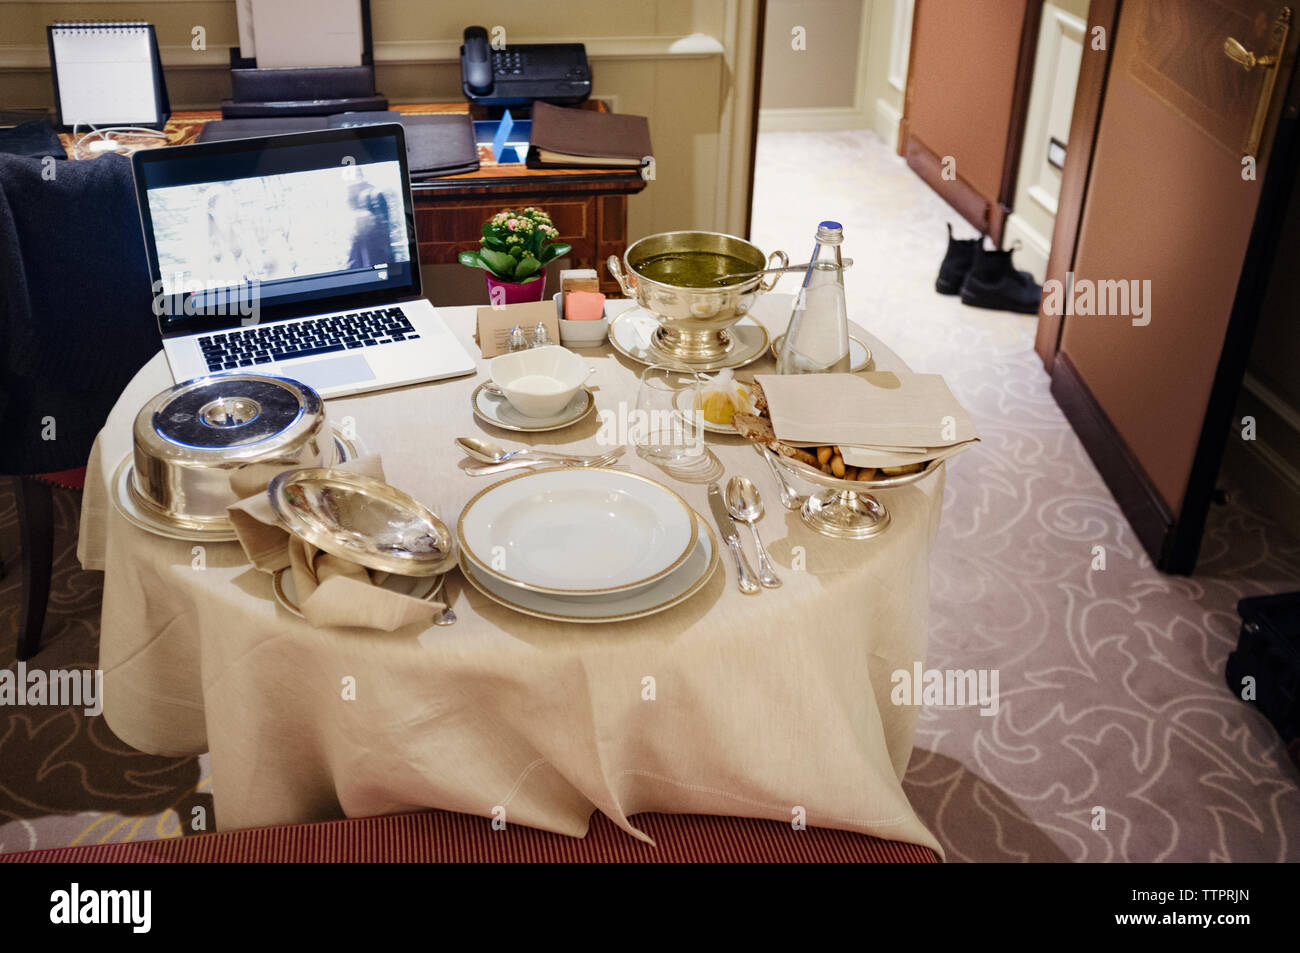 High angle view of laptop and eating utensils on table Stock Photo